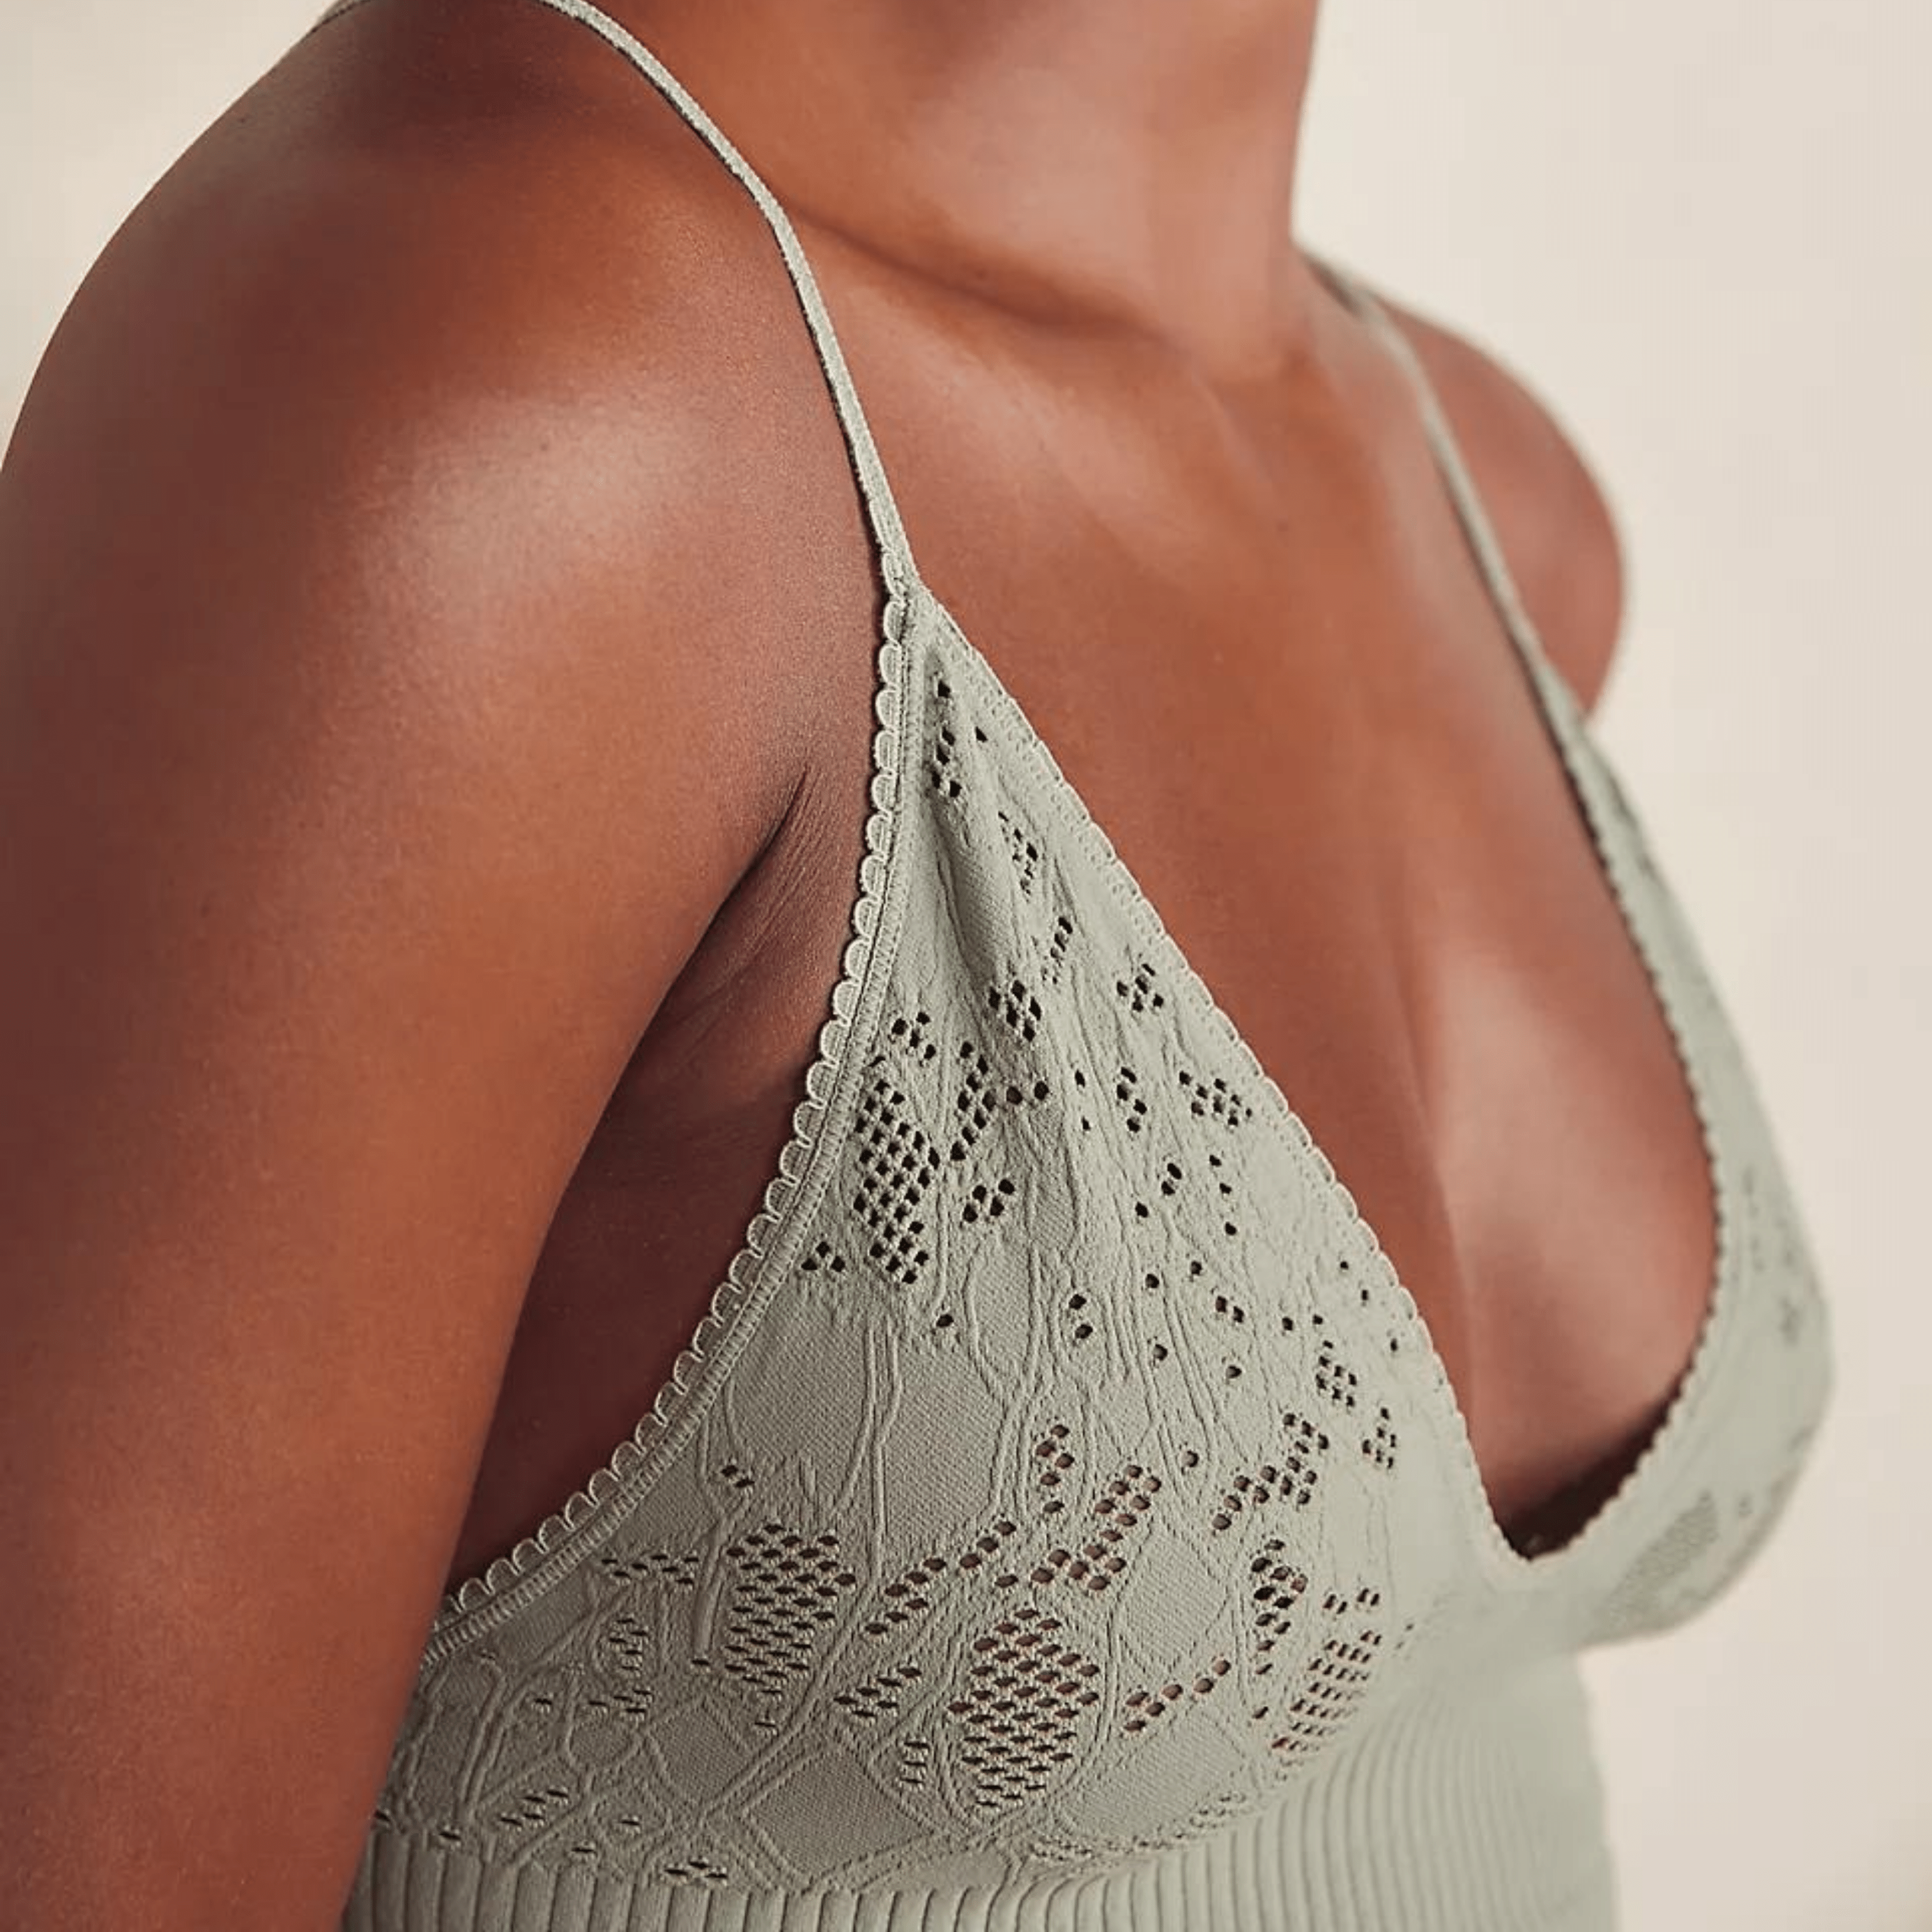 Feels Right Bralette in Washed Army on Model